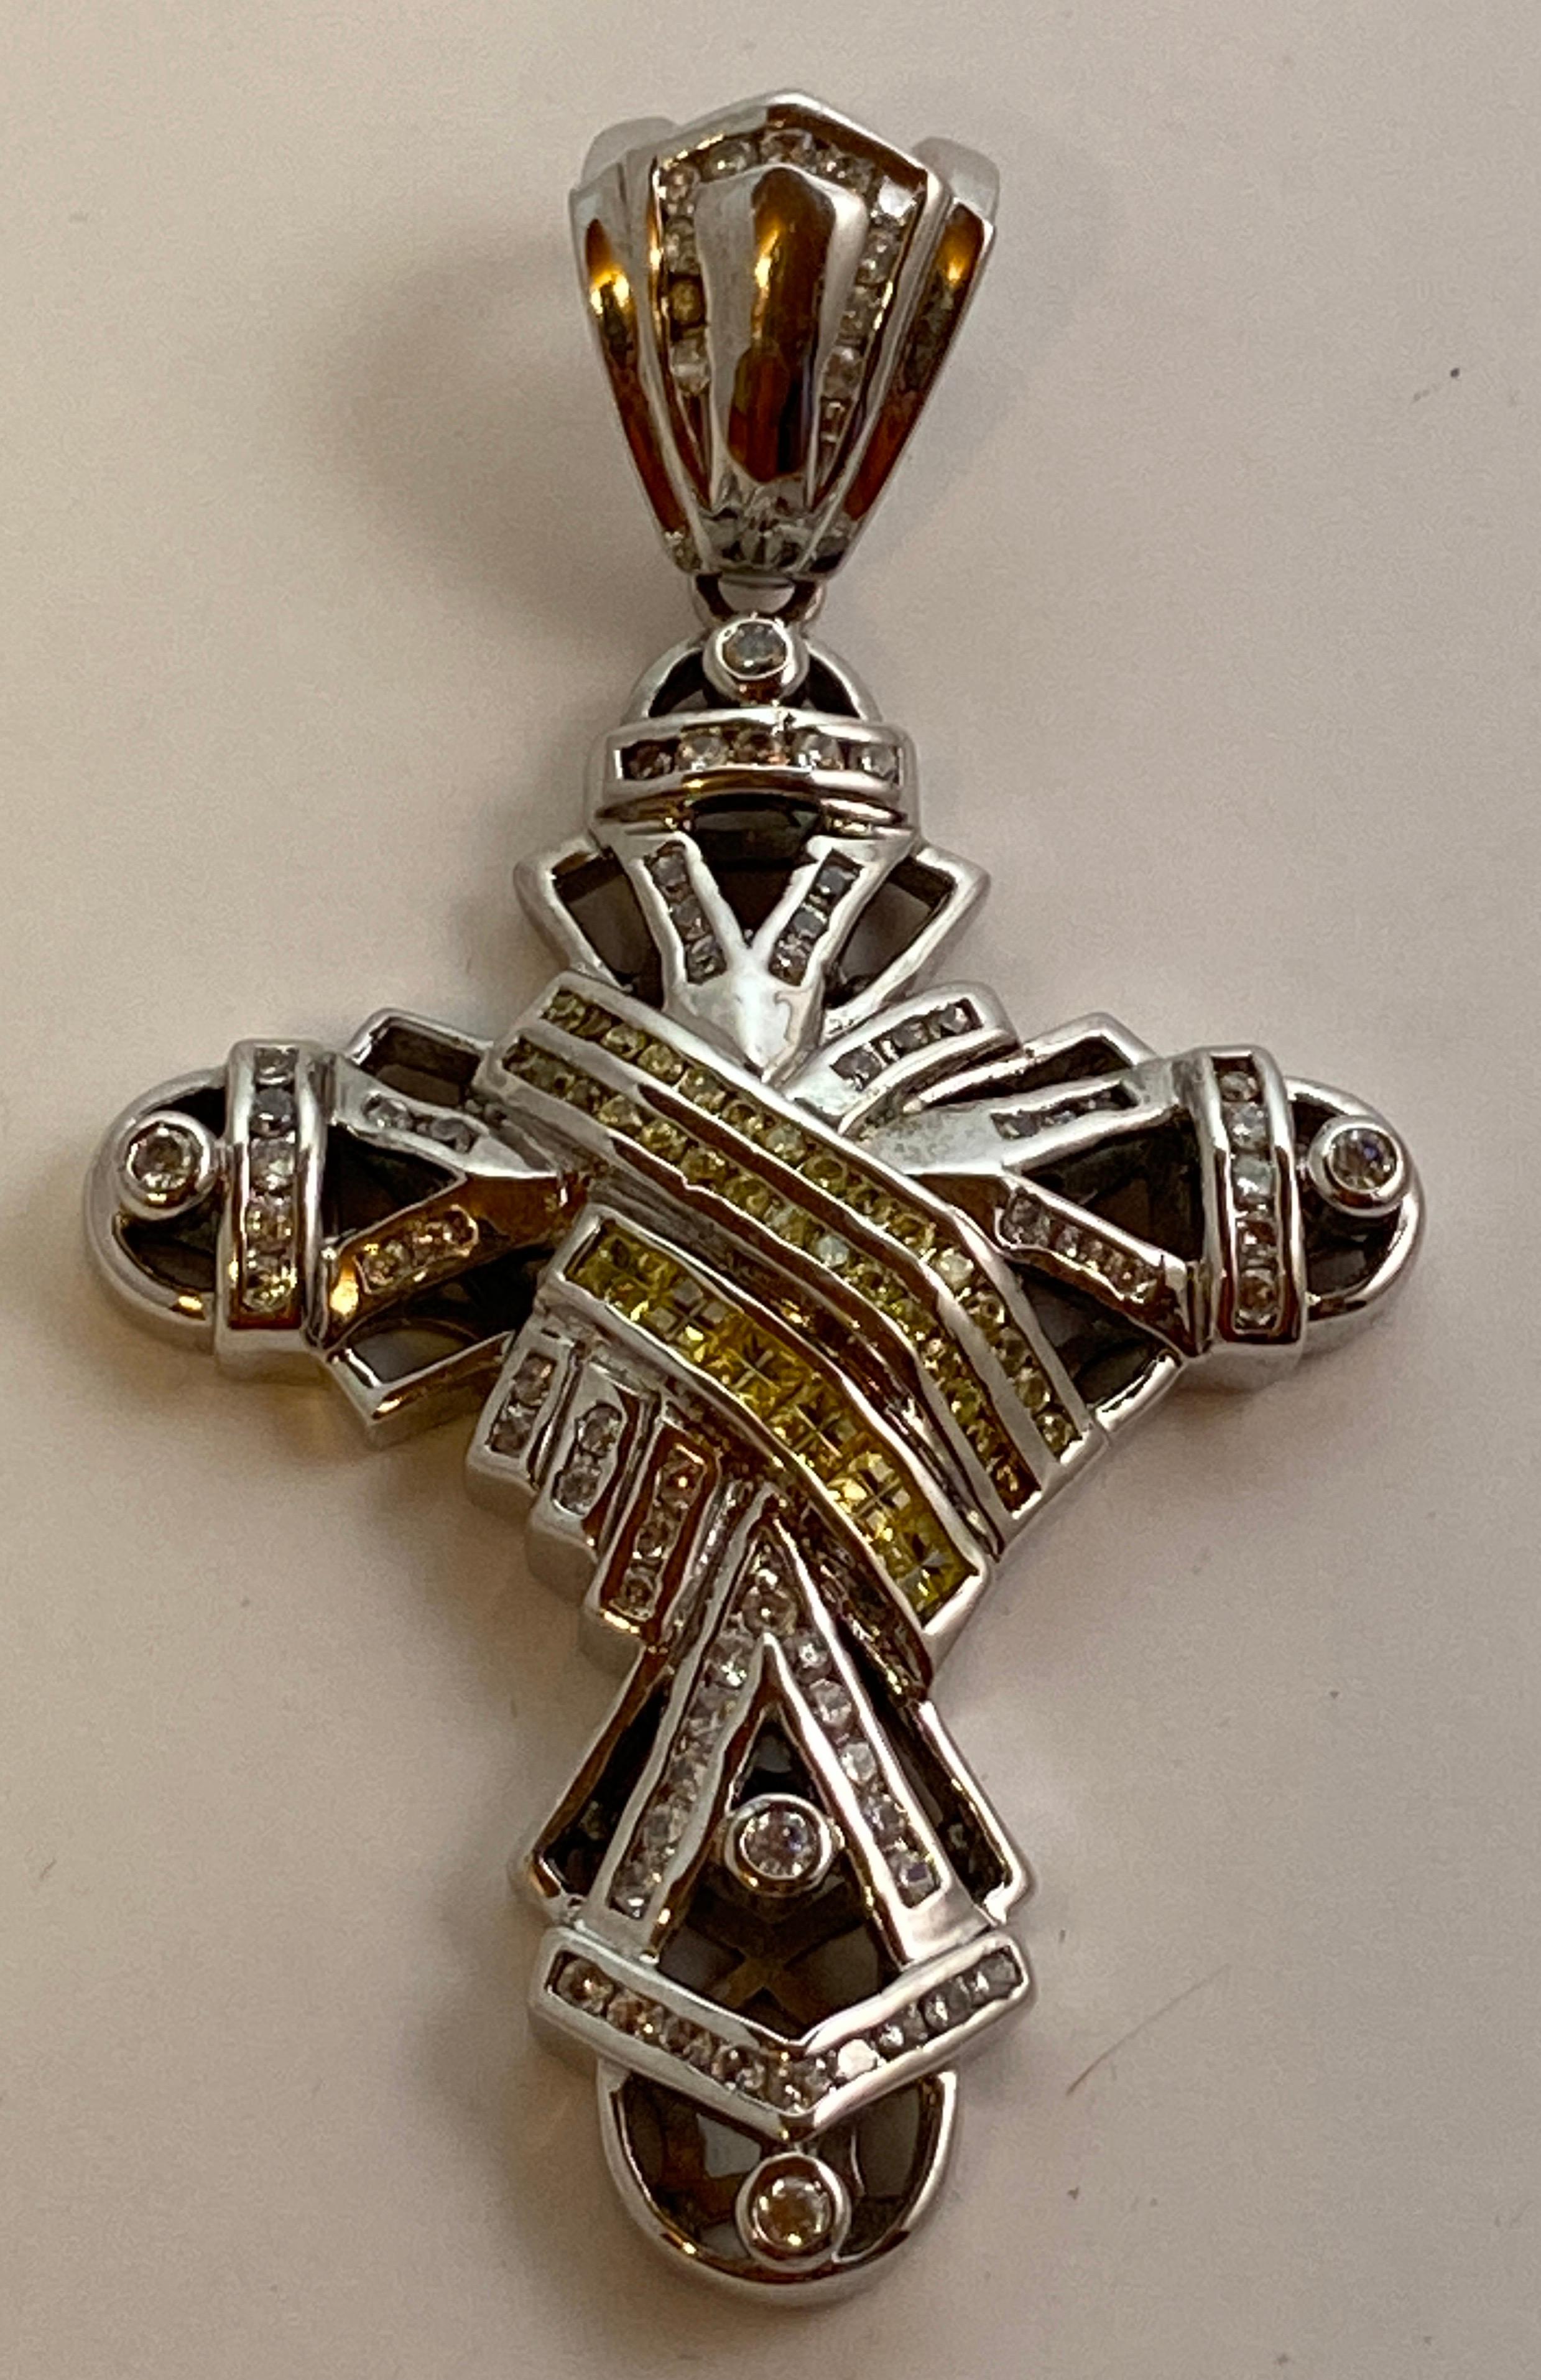 This heavily plated white gold pendant is accented with semi precious stones. The center is accented with yellow semi-precious stones. The total length measures 3 1/4 inches. the width measures 2 inches. Depth measures 3/8 of a inch. Made in US.